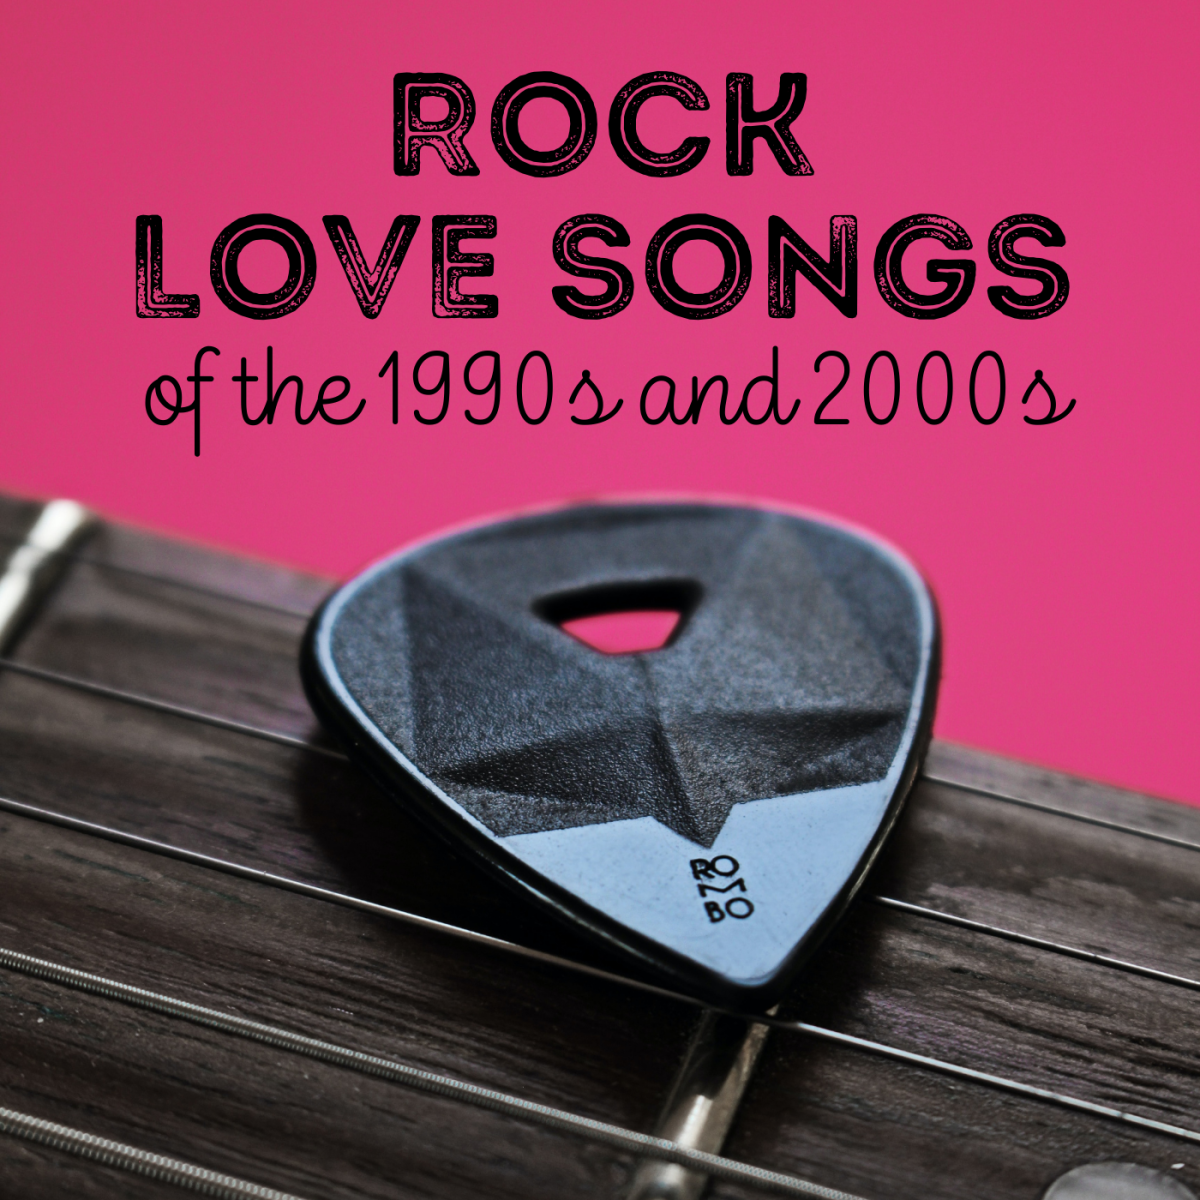 100 Best Rock Love Songs of the '90s and 2000s - Spinditty